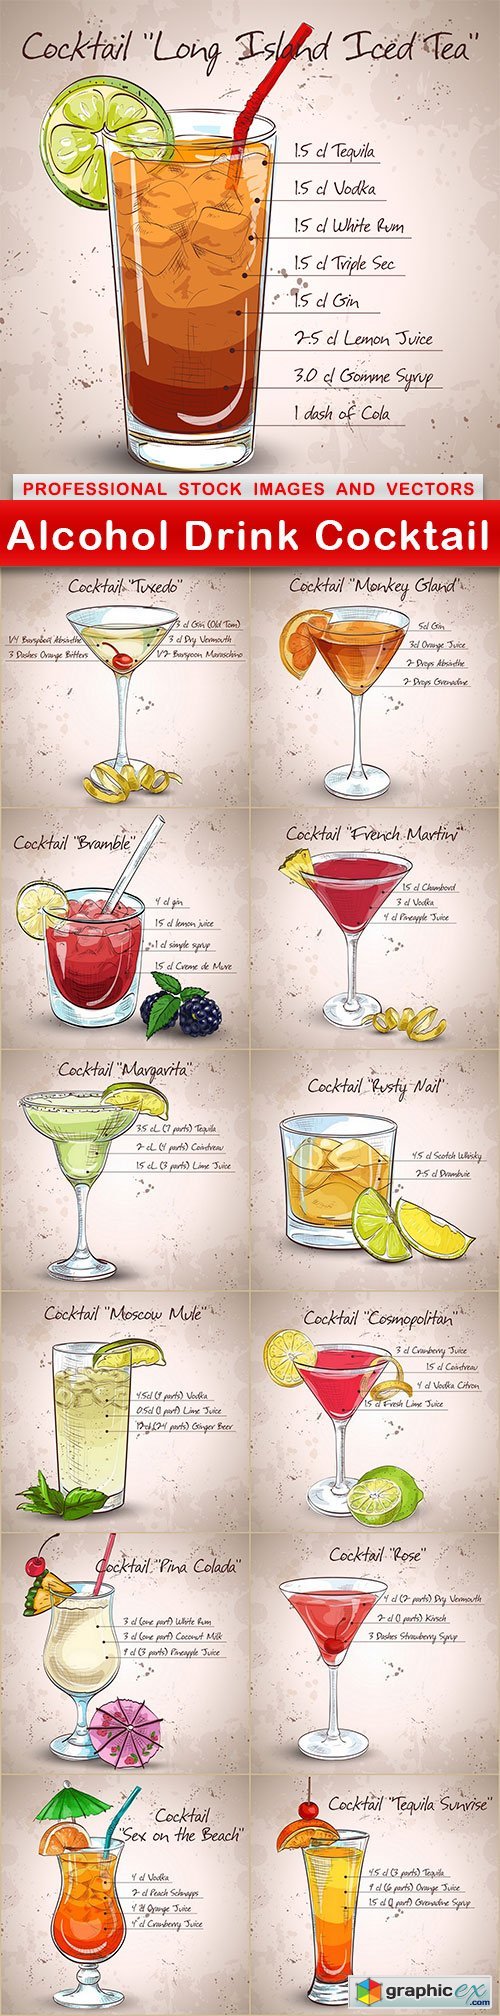 Alcohol Drink Cocktail - 13 EPS